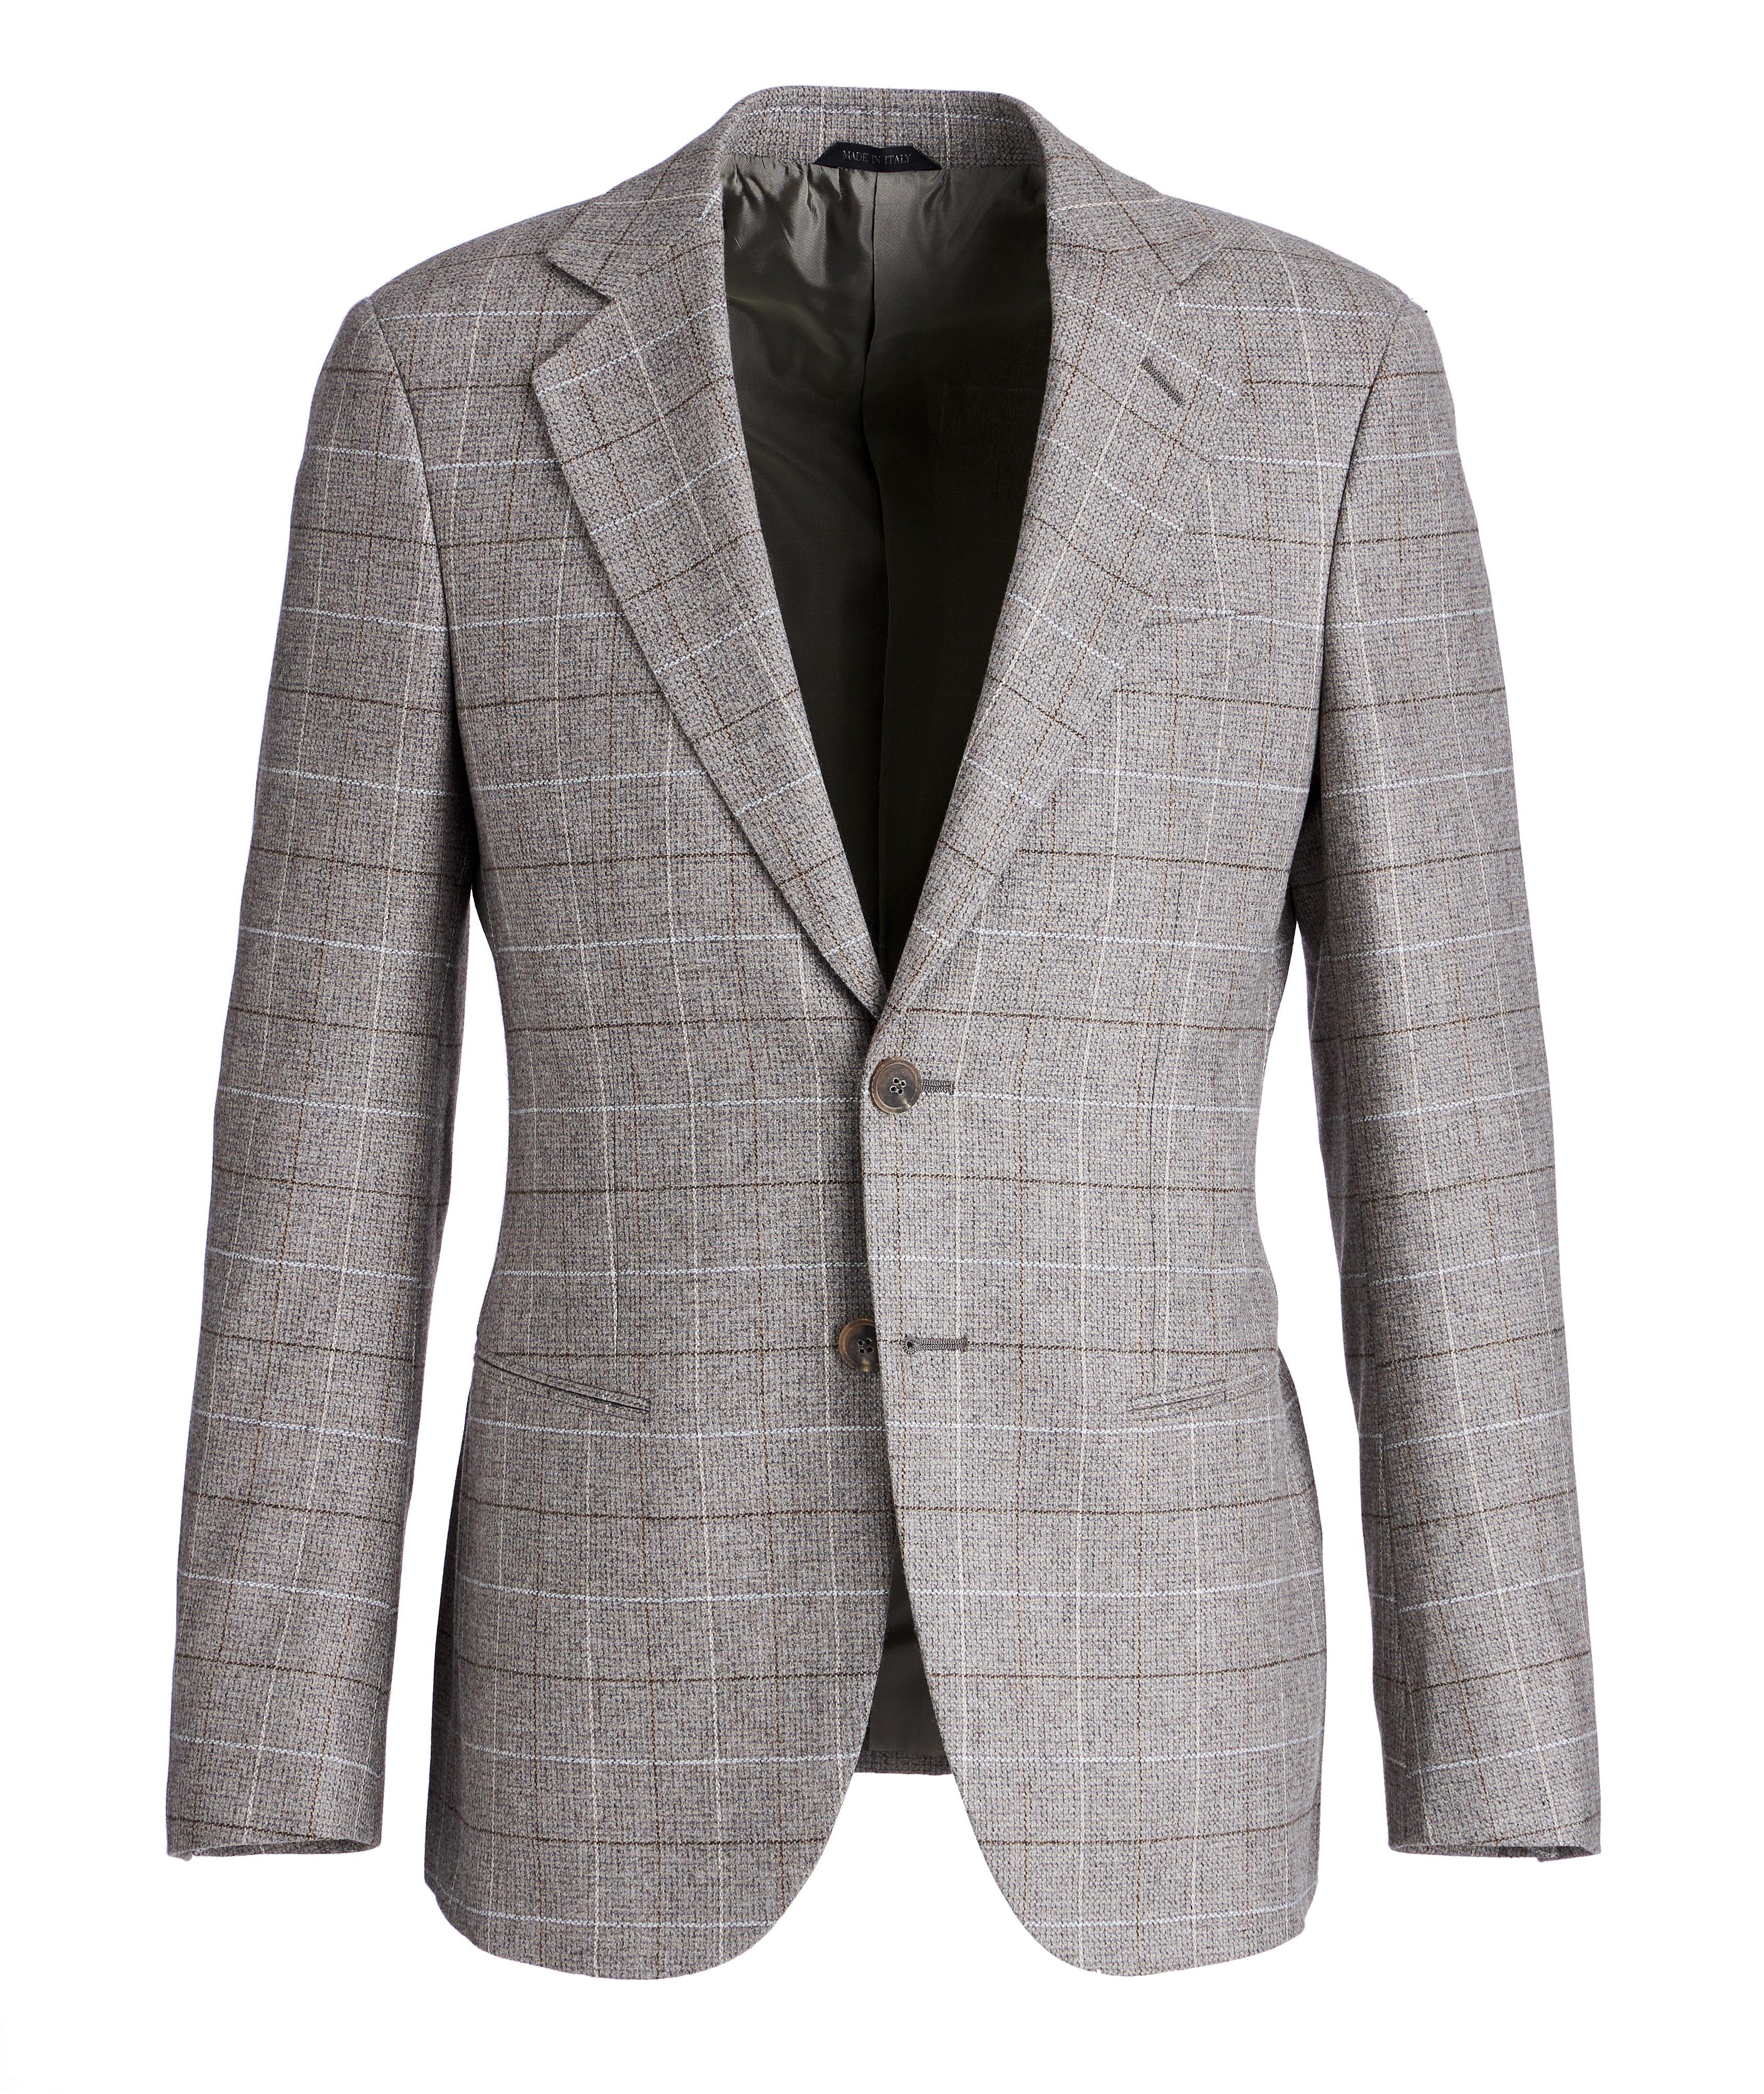 George Checked Wool-Cashmere Sports Jacket image 0